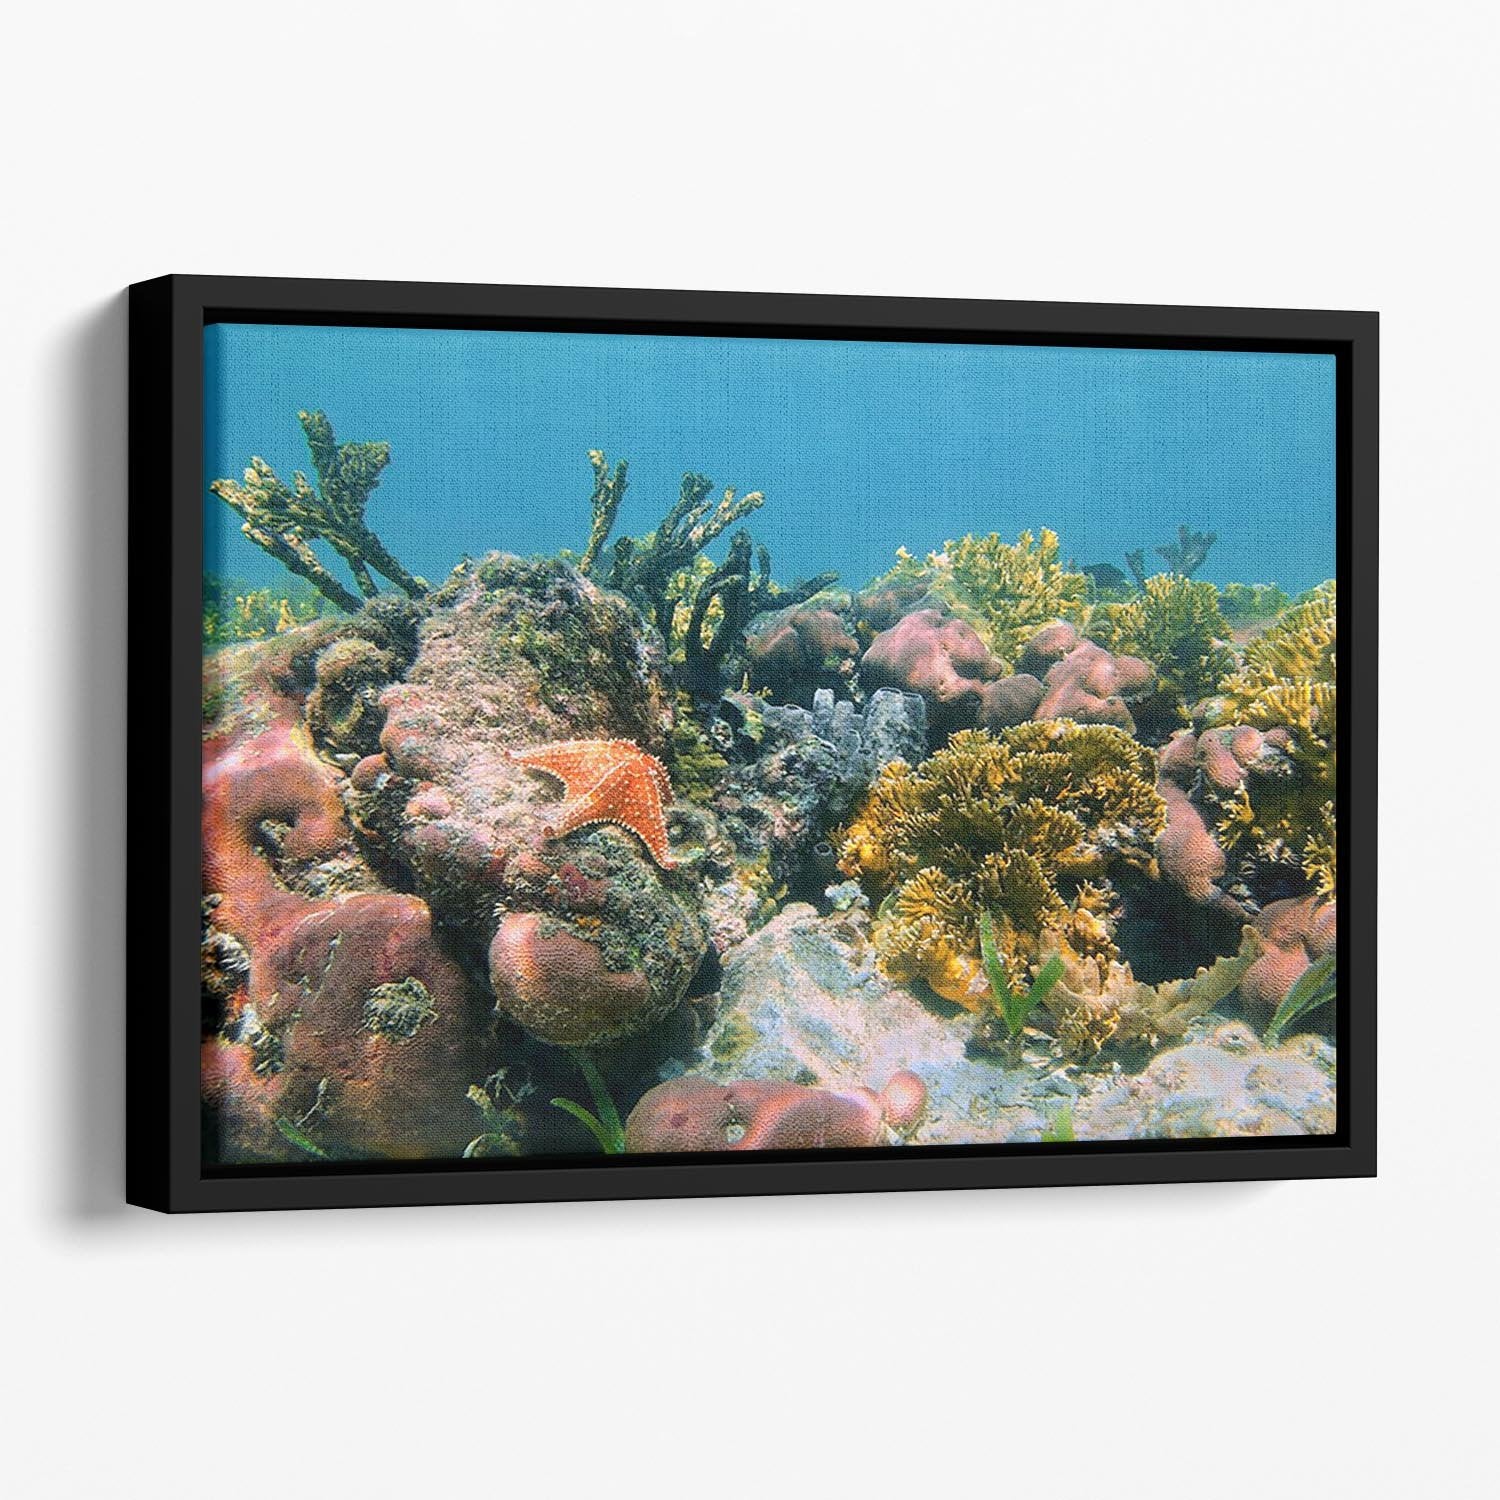 Underwater reef in the Caribbean sea with corals sponges and a starfish Floating Framed Canvas - Canvas Art Rocks - 1